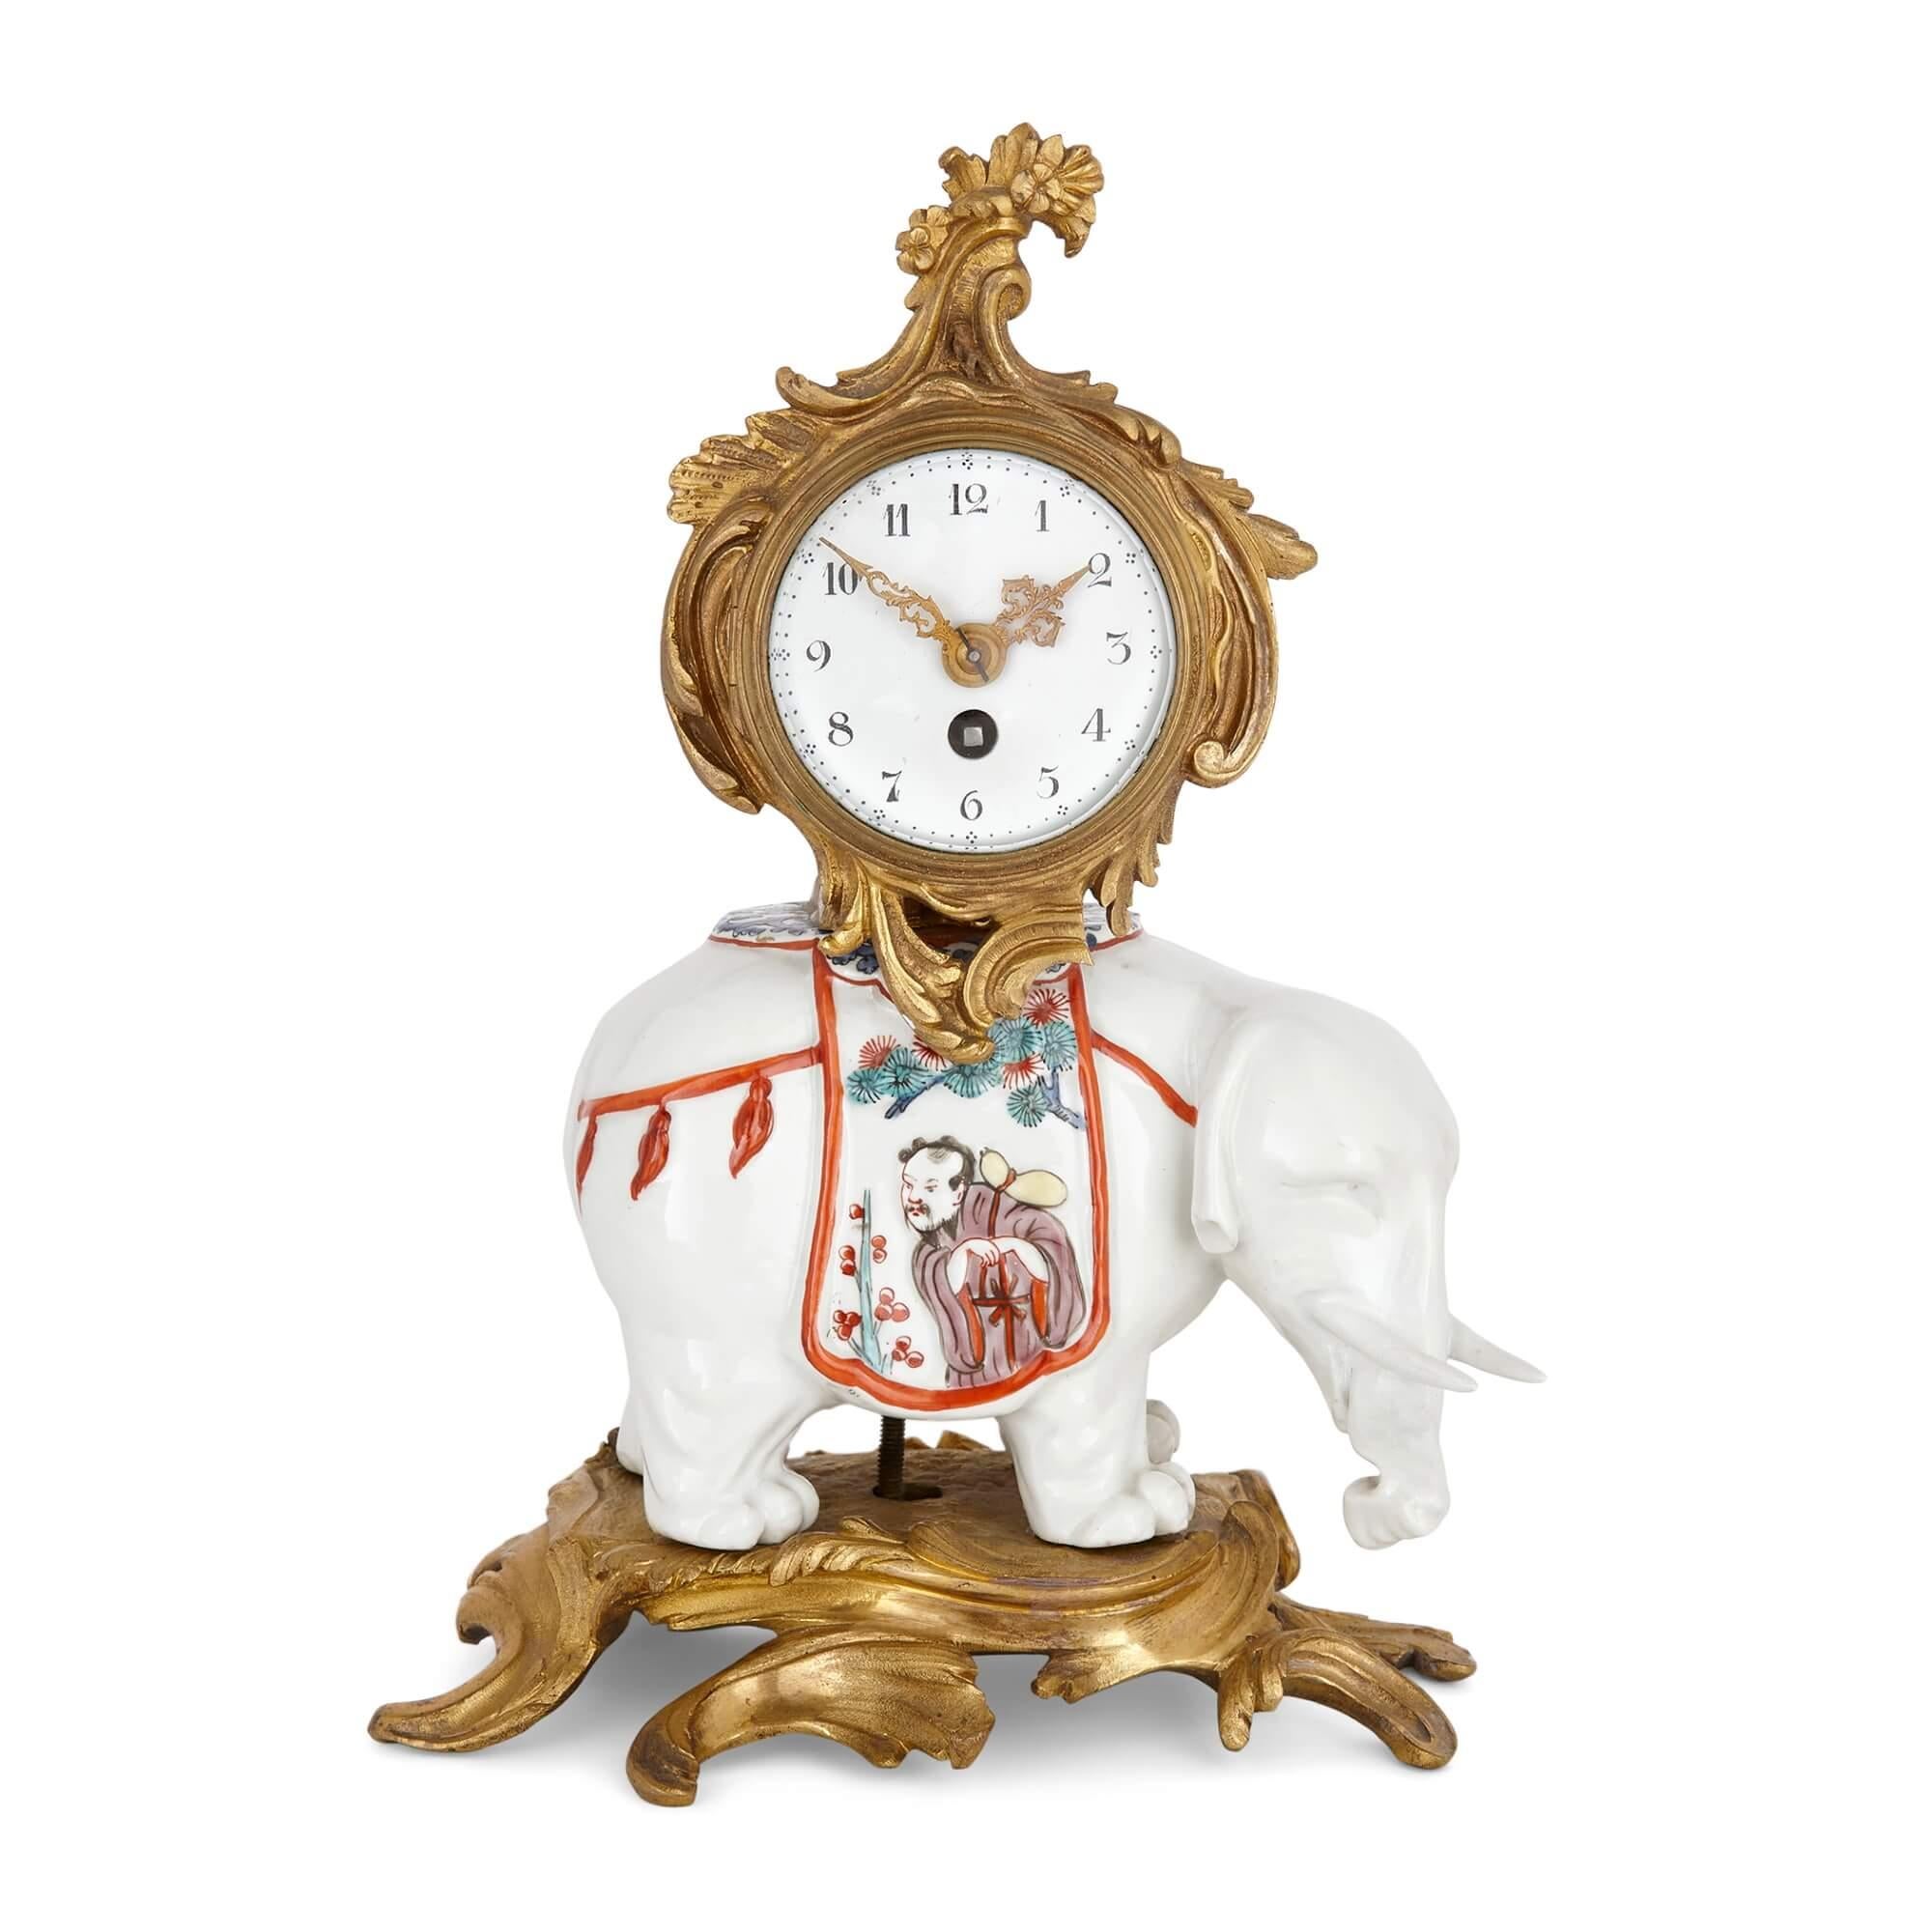 Antique Samson porcelain and ormolu Chinoiserie elephant clock 
French, Late 19th Century 
Height 24cm, width 17cm, depth 13cm

This exquisite and delicate clock typifies the European fascination in the 19th century with Chinese art and Orientalist